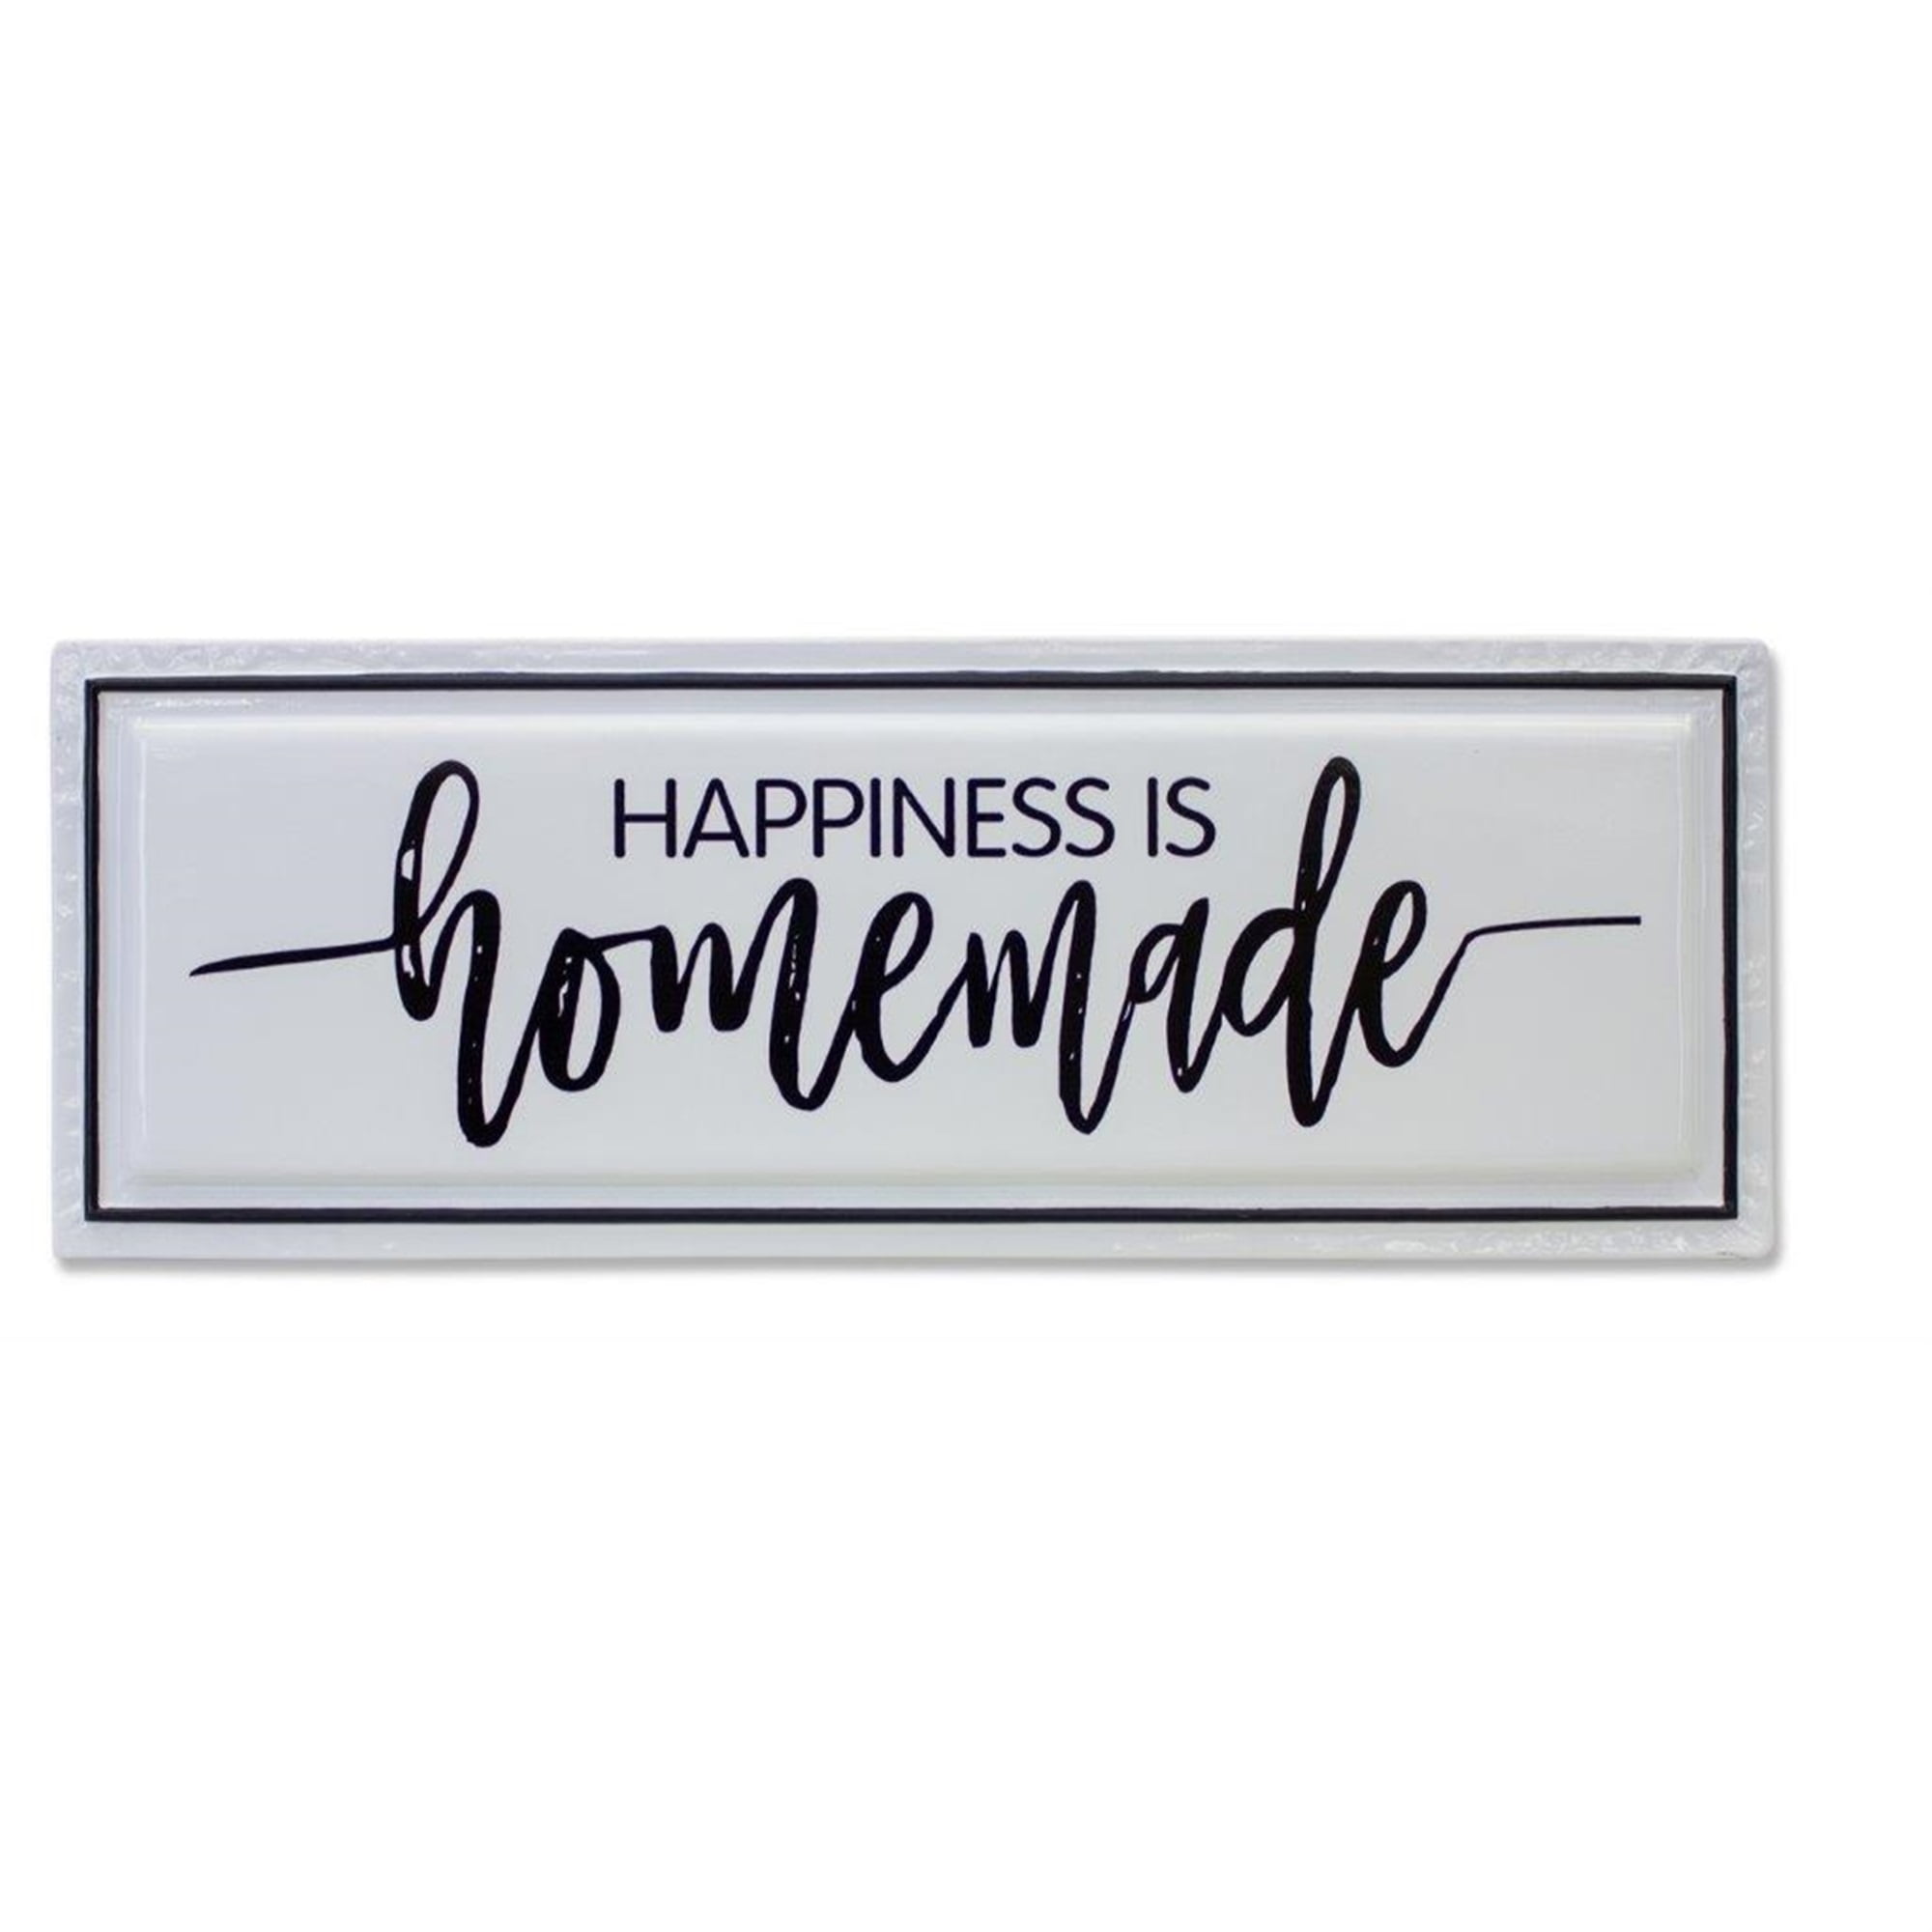 Happiness is Homemade Sign 24.5"L x 8.75"H Iron